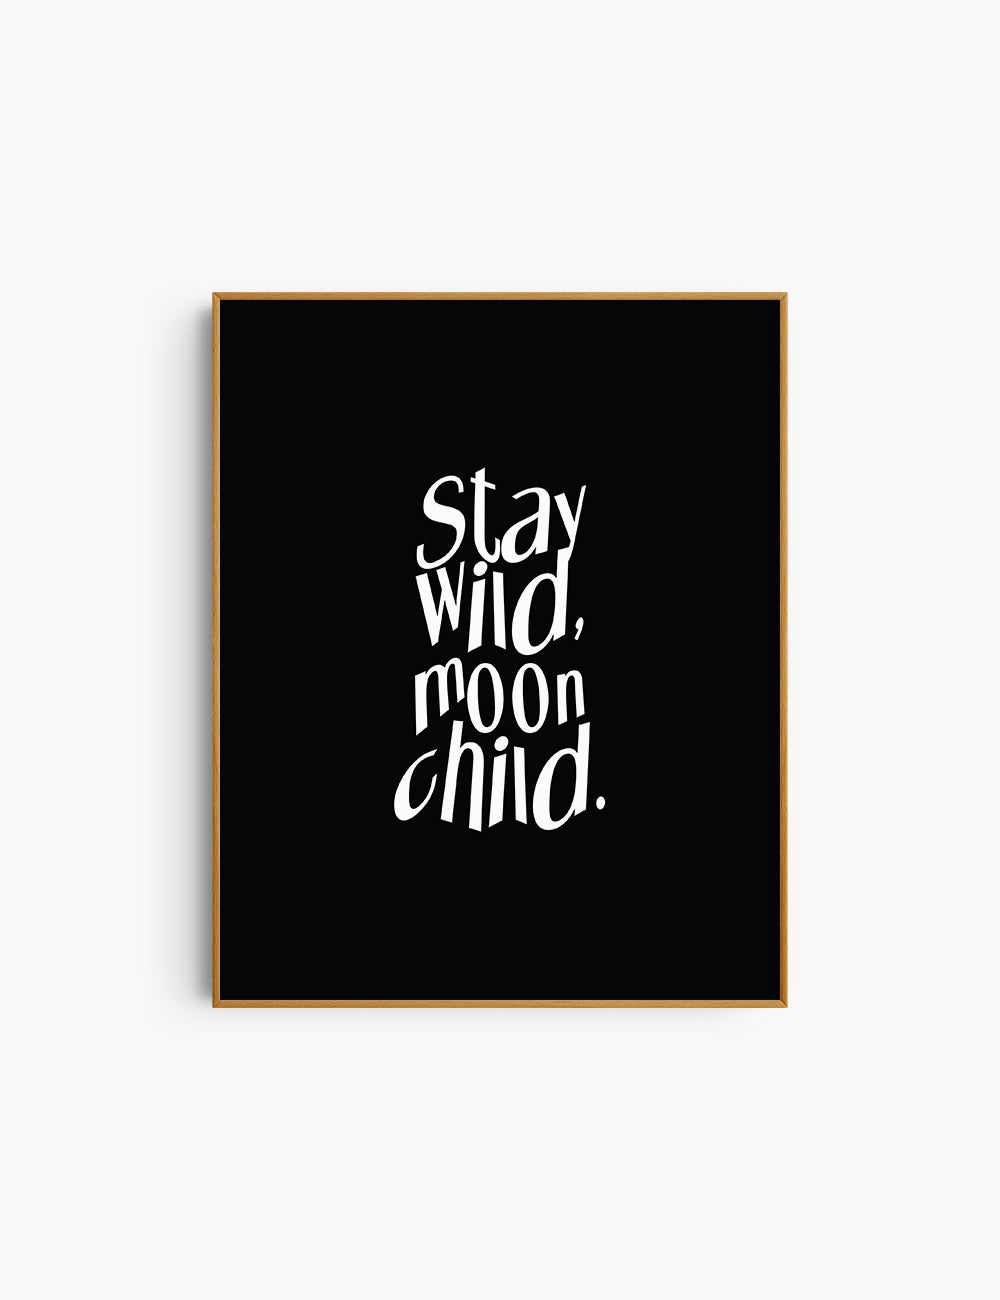 STAY WILD, MOON CHILD. Black and White. Printable Wall Art Quote.